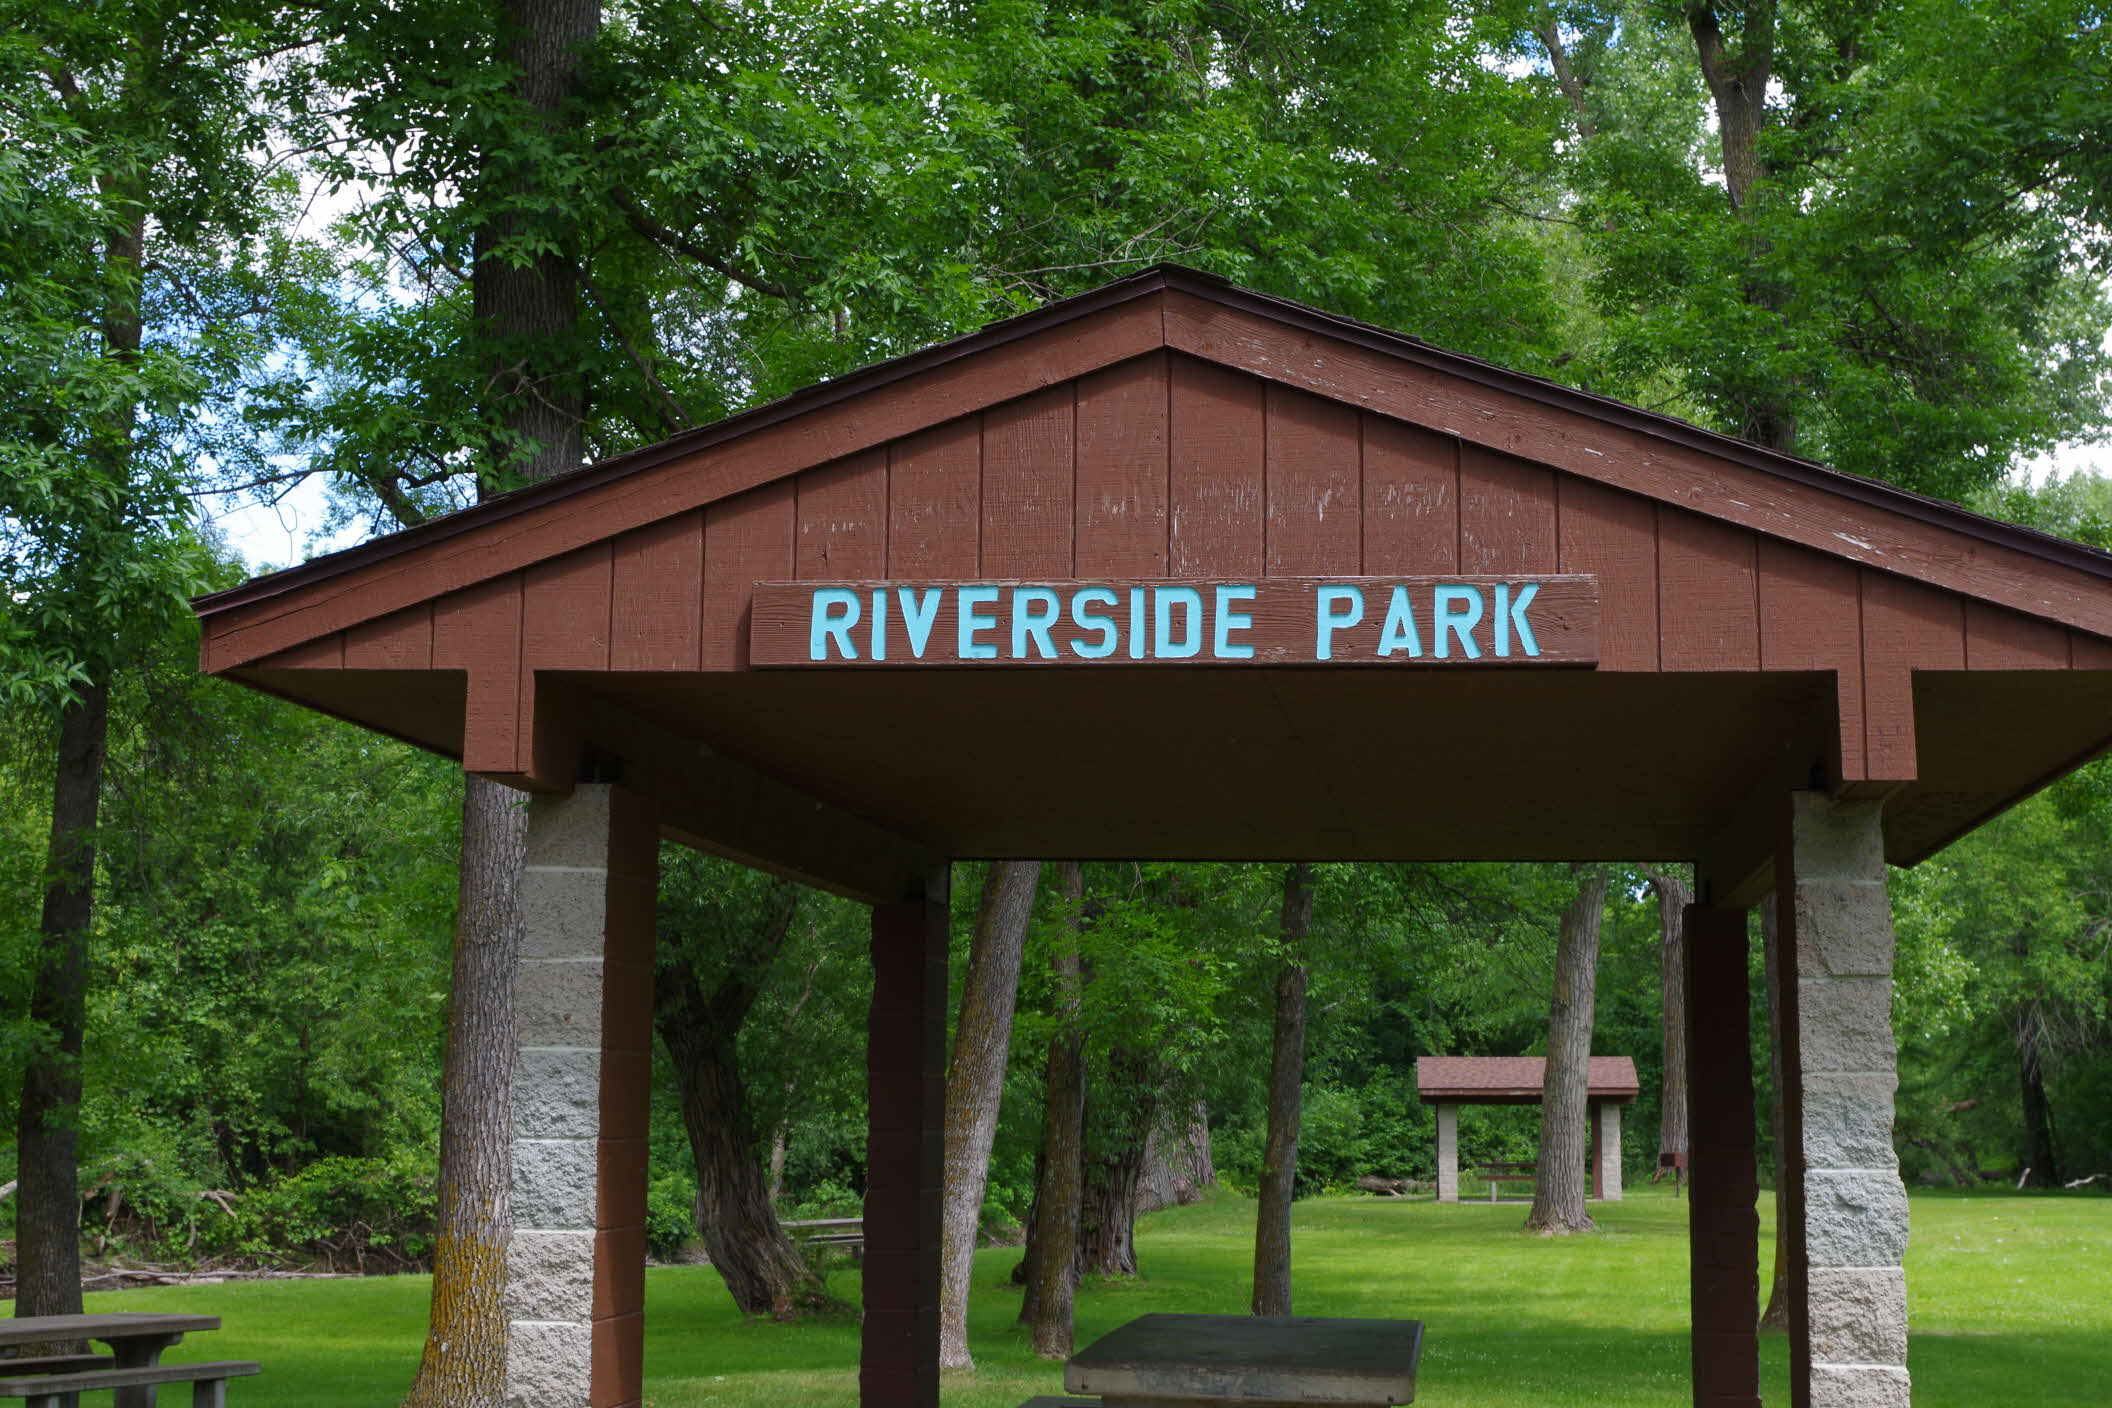 Sign above picnic shelter at Riverside Park, Clearwater MN